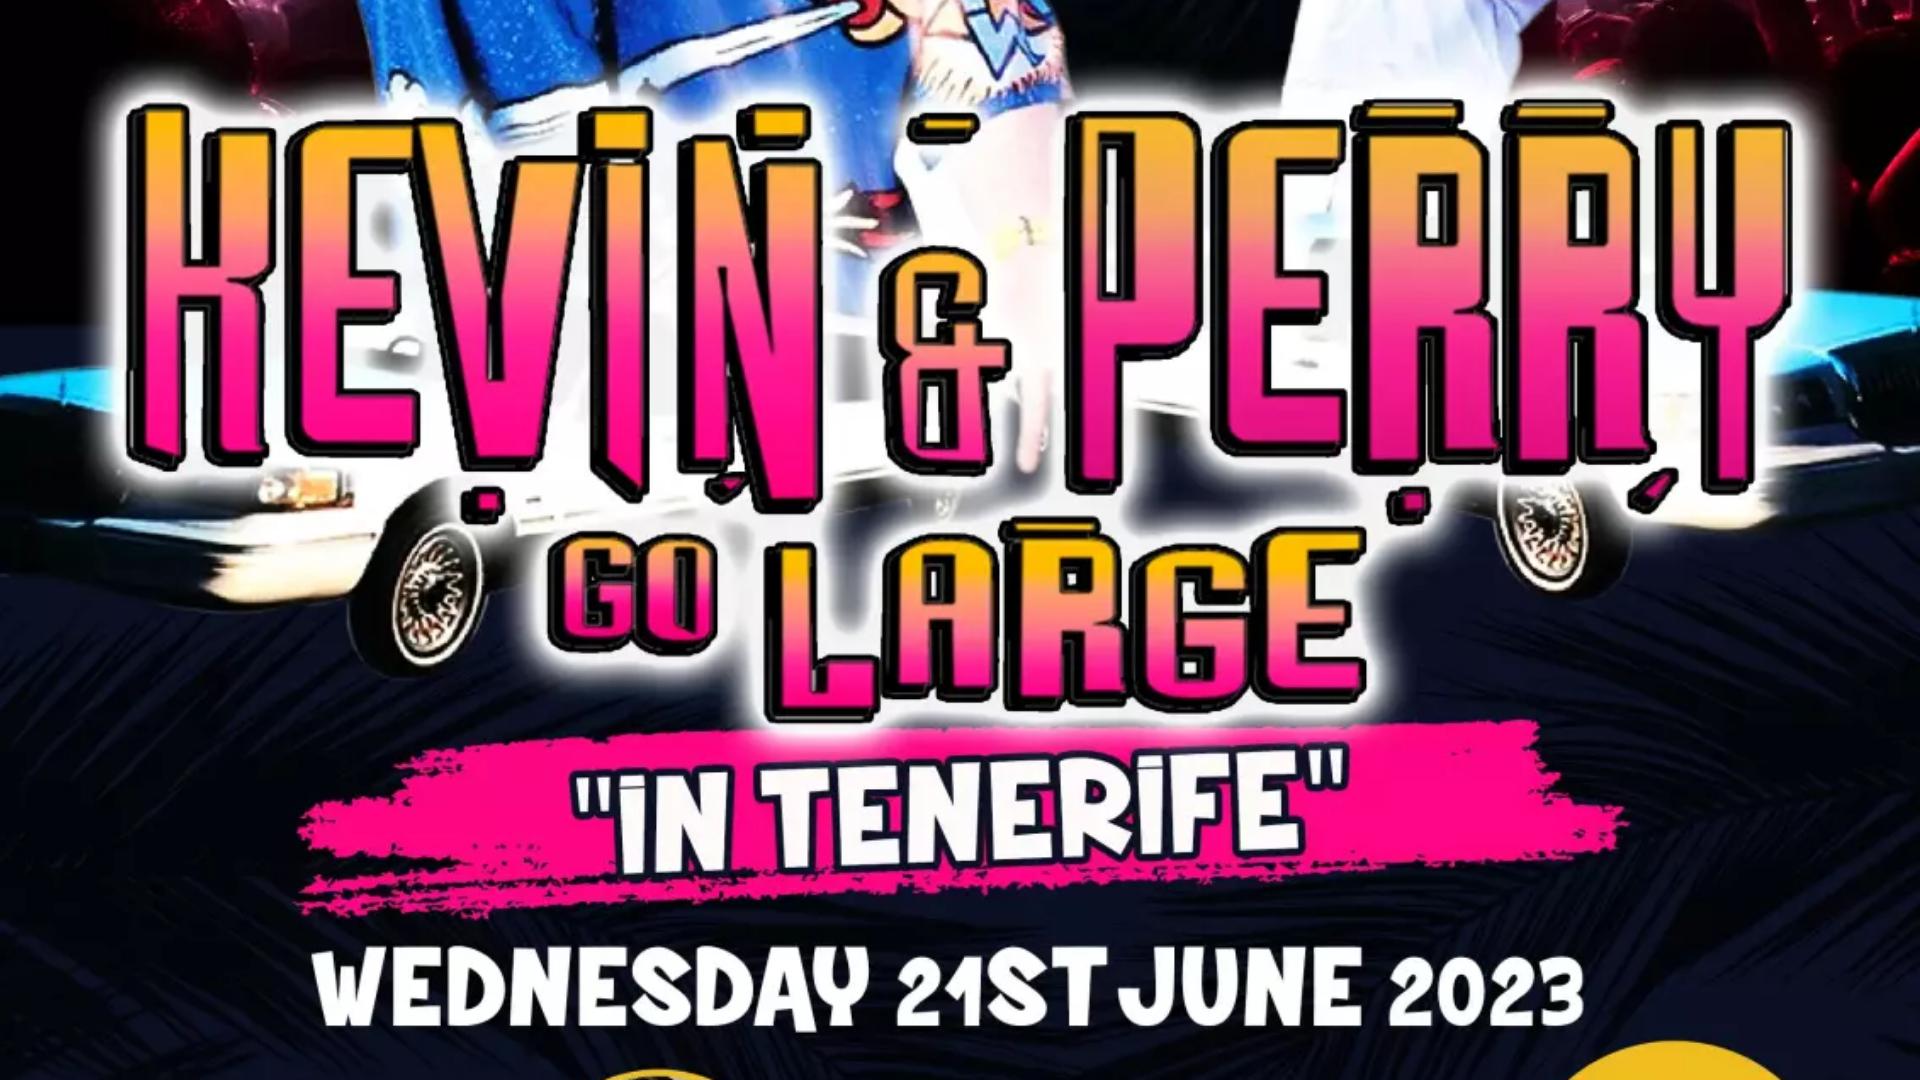 Kevin & Perry with Dave pearce Tenerife